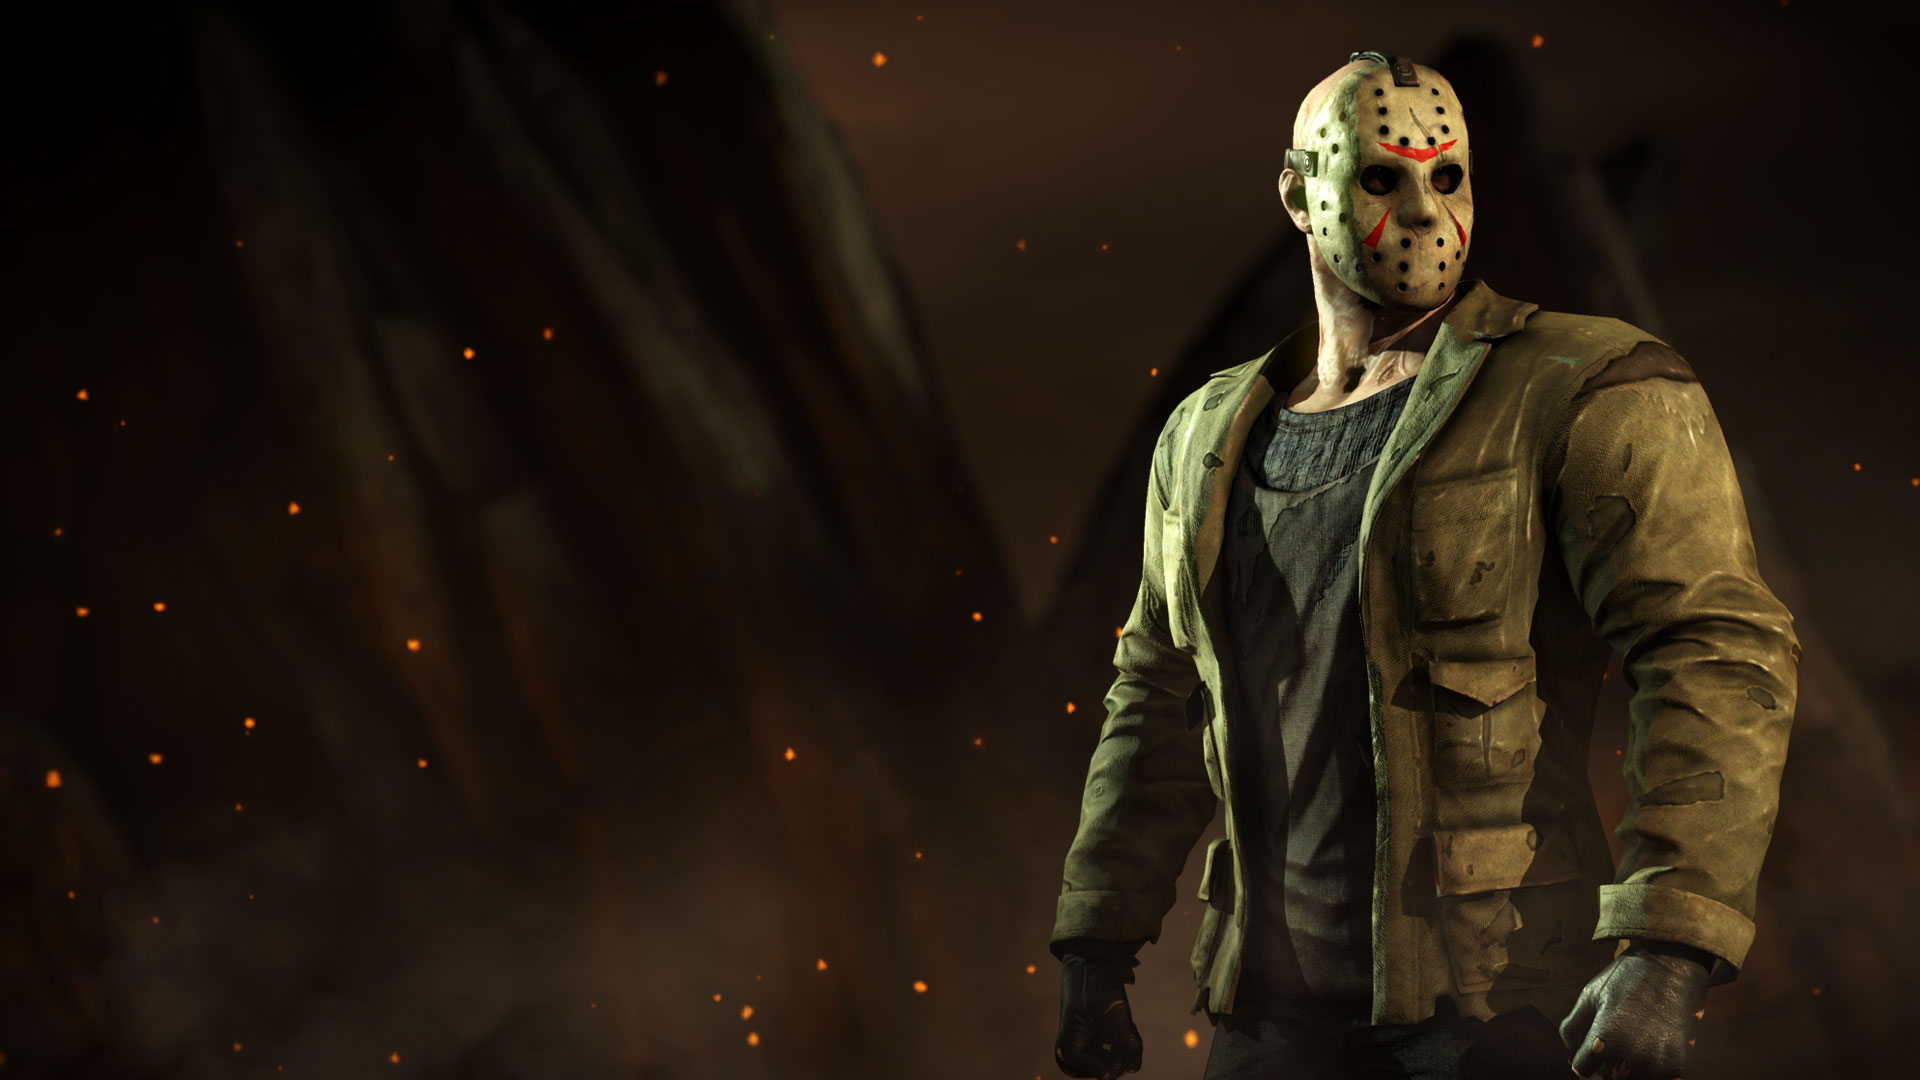 Wallpaper ID 1035522  2K Jason Voorhees Friday the 13th Slasher mask  horror Horror movies Killer free download